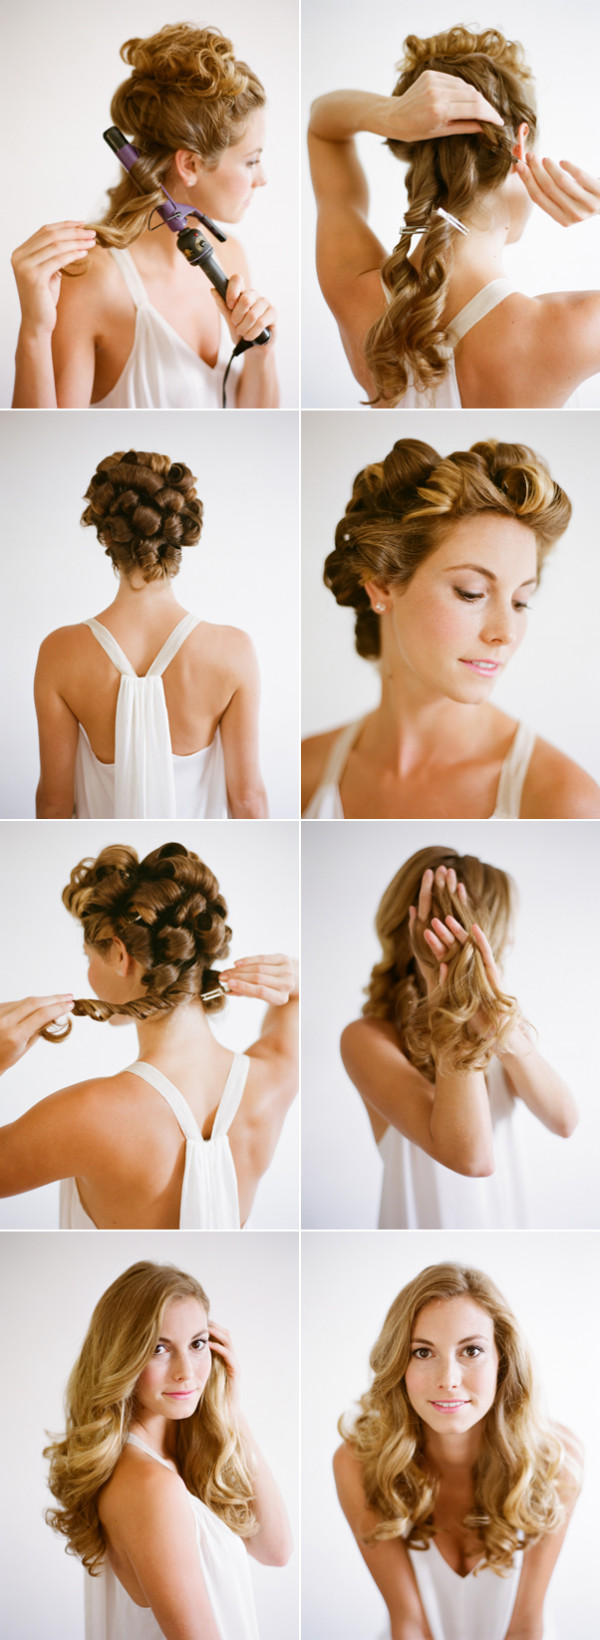 18 Great Ideas and Tutorials for Sophisticated Hairstyle (17)